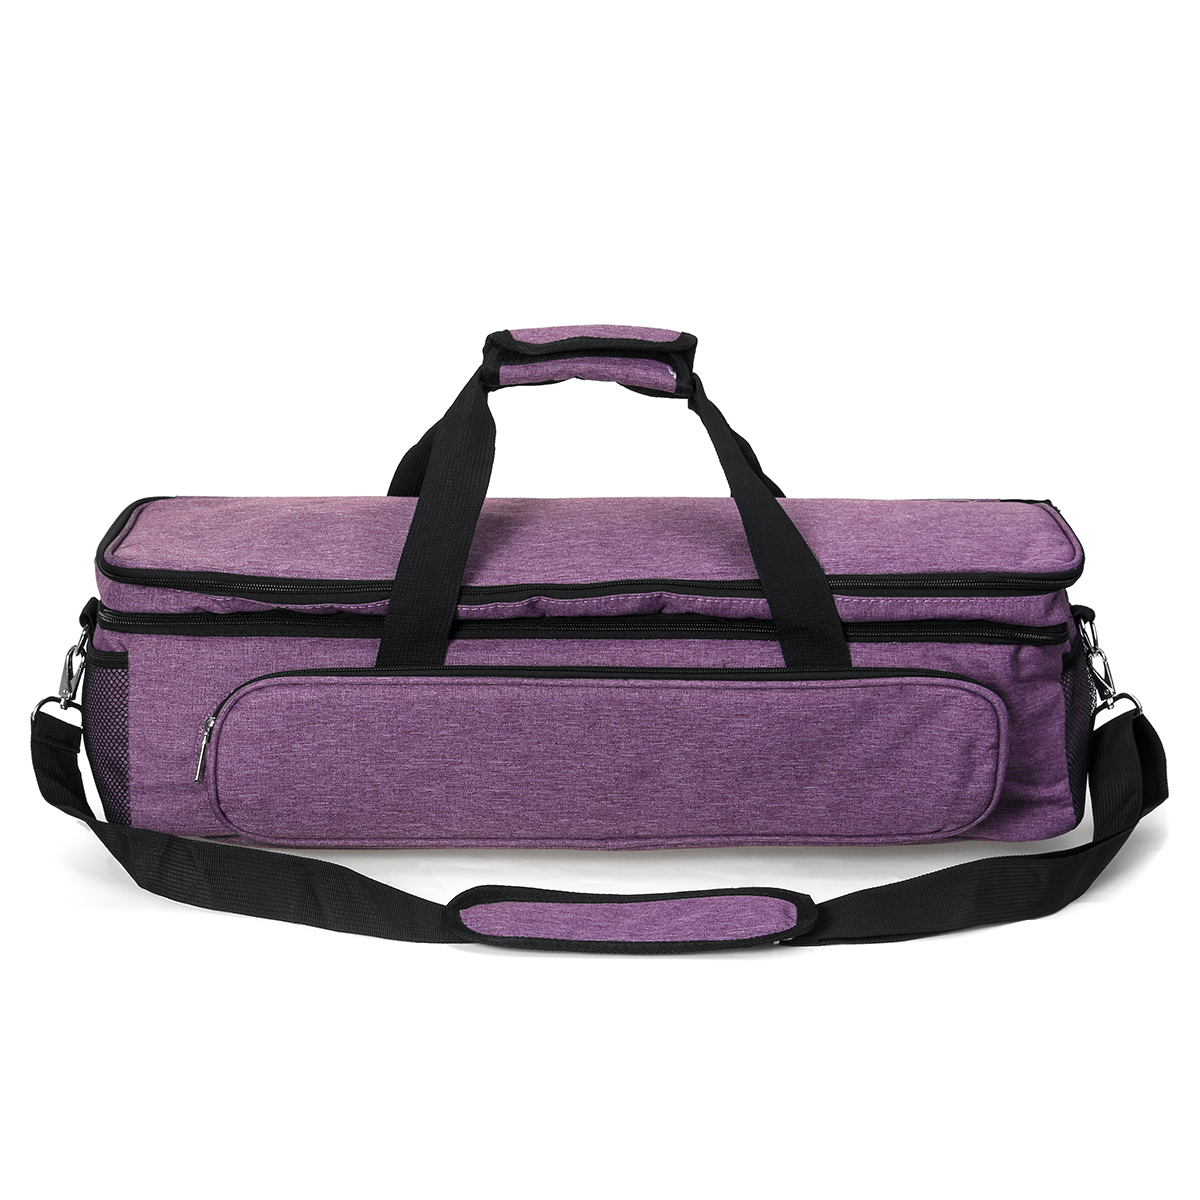 Portable-600D-Oxford-Cloth-Cutting-Machine-Carrying-Storage-Bag-Tool-Travel-Case-1618038-8